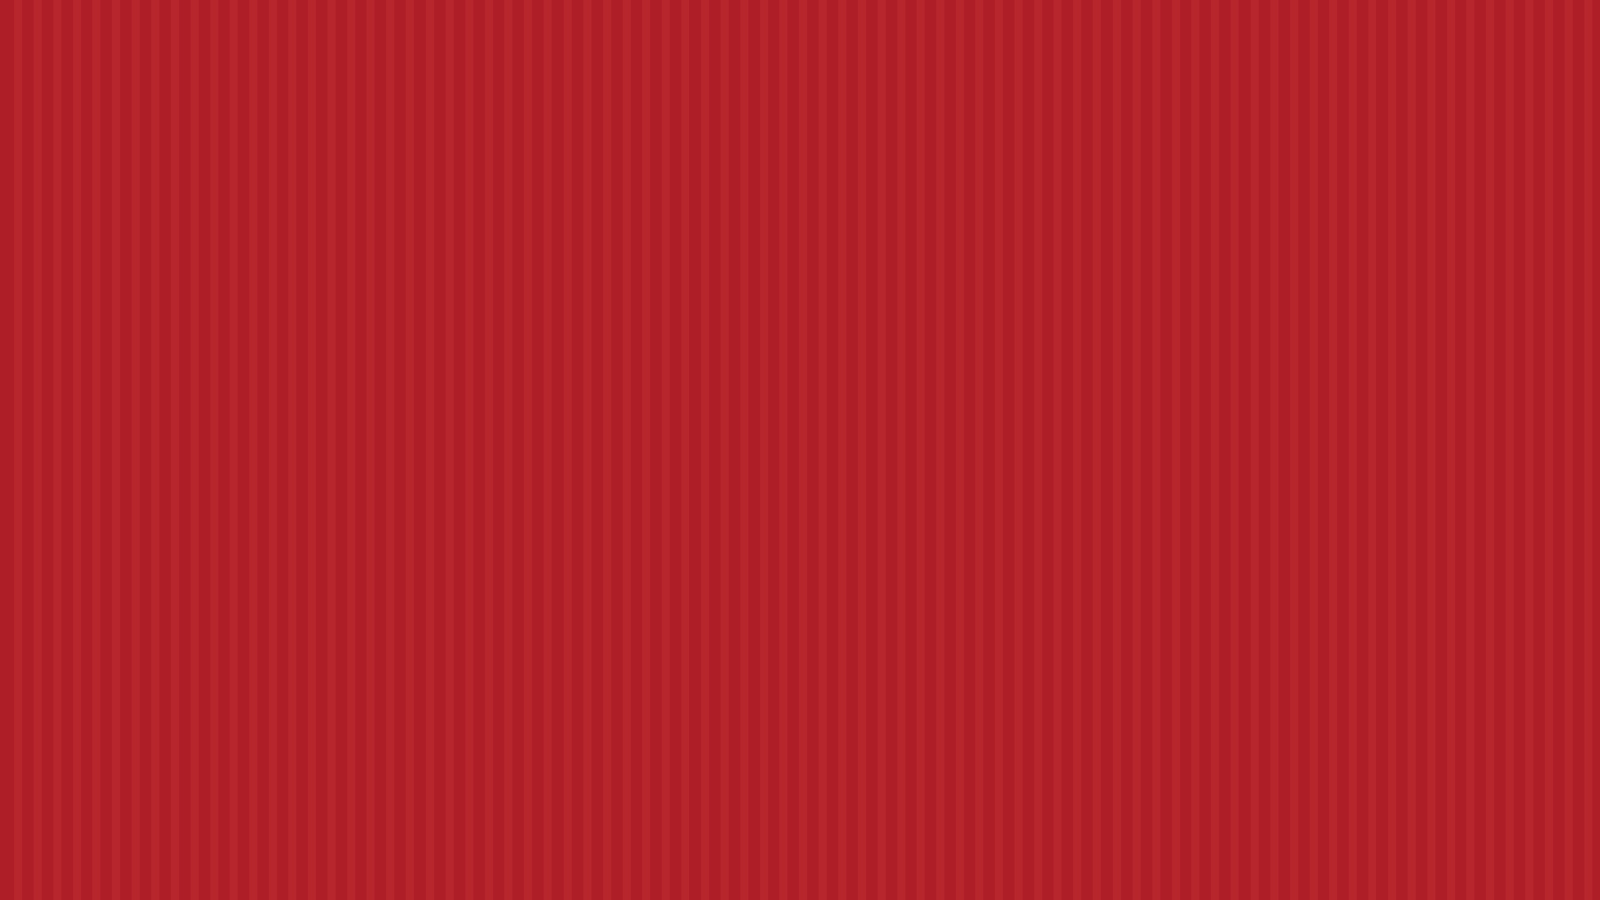 Plain Red Color HD Solid Color Wallpapers  HD Wallpapers  ID 61332